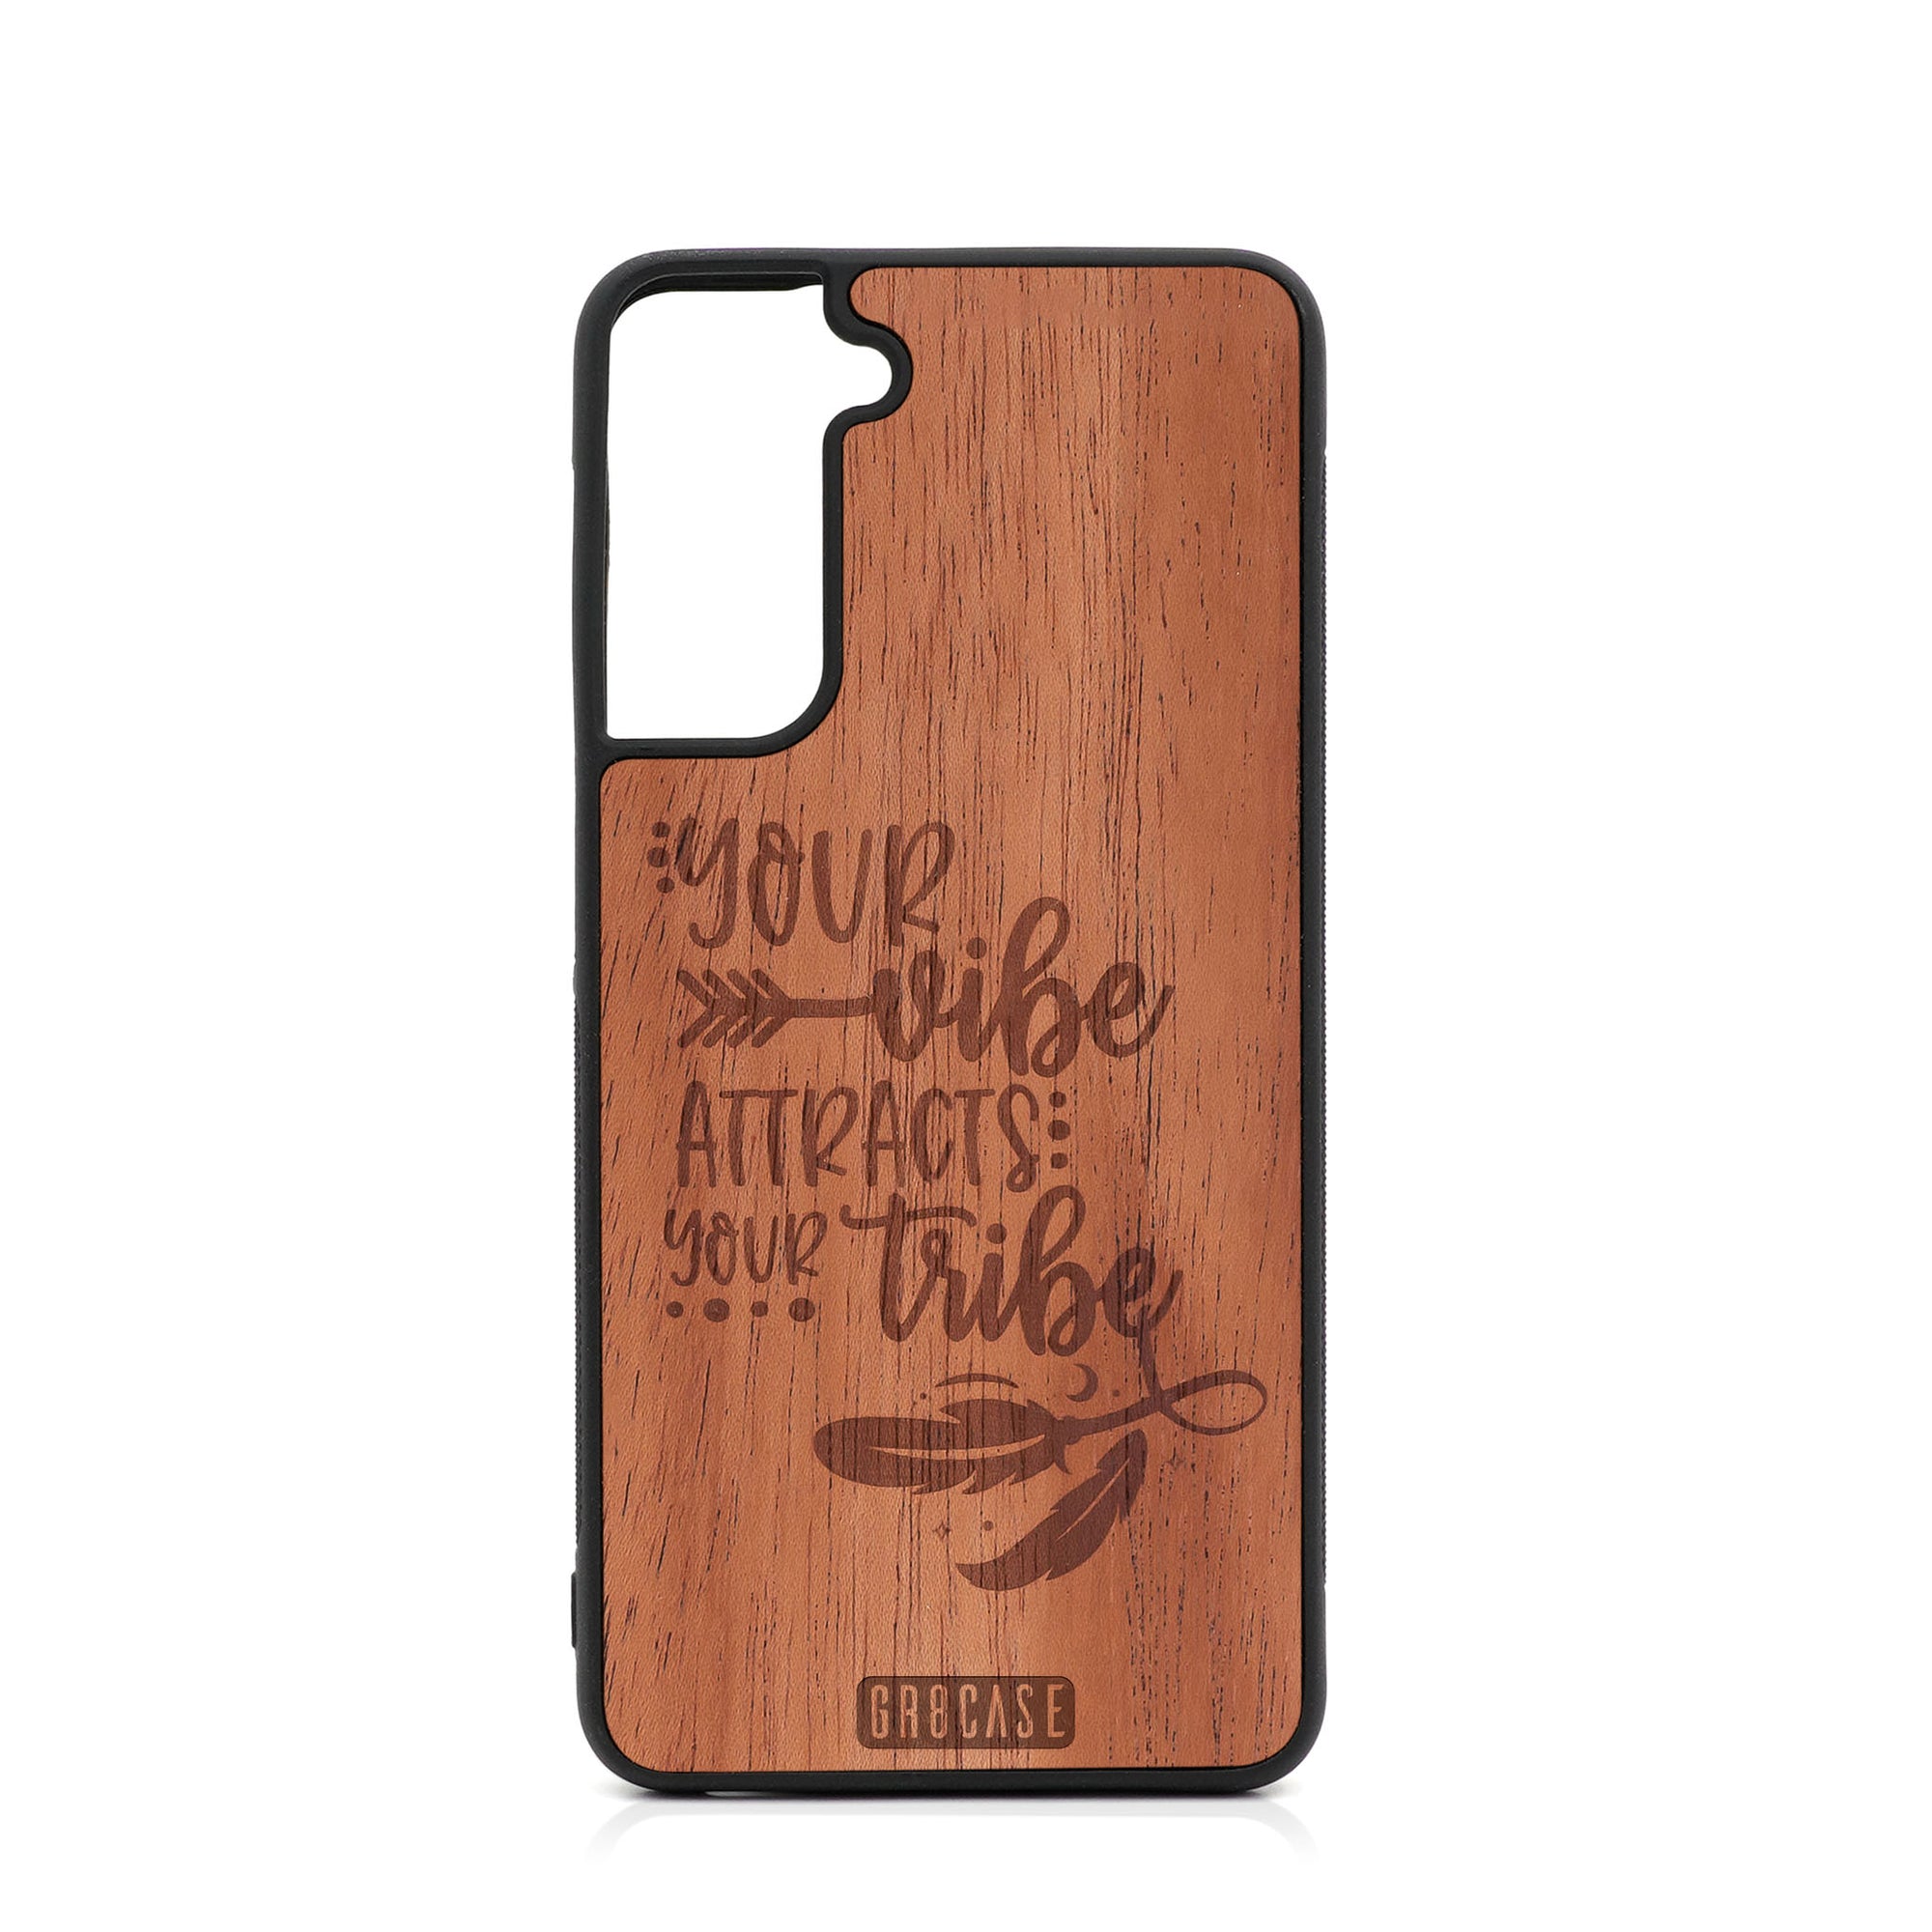 Your Vibe Attracts Your Tribe Design Wood Case For Samsung Galaxy S21 Plus 5G